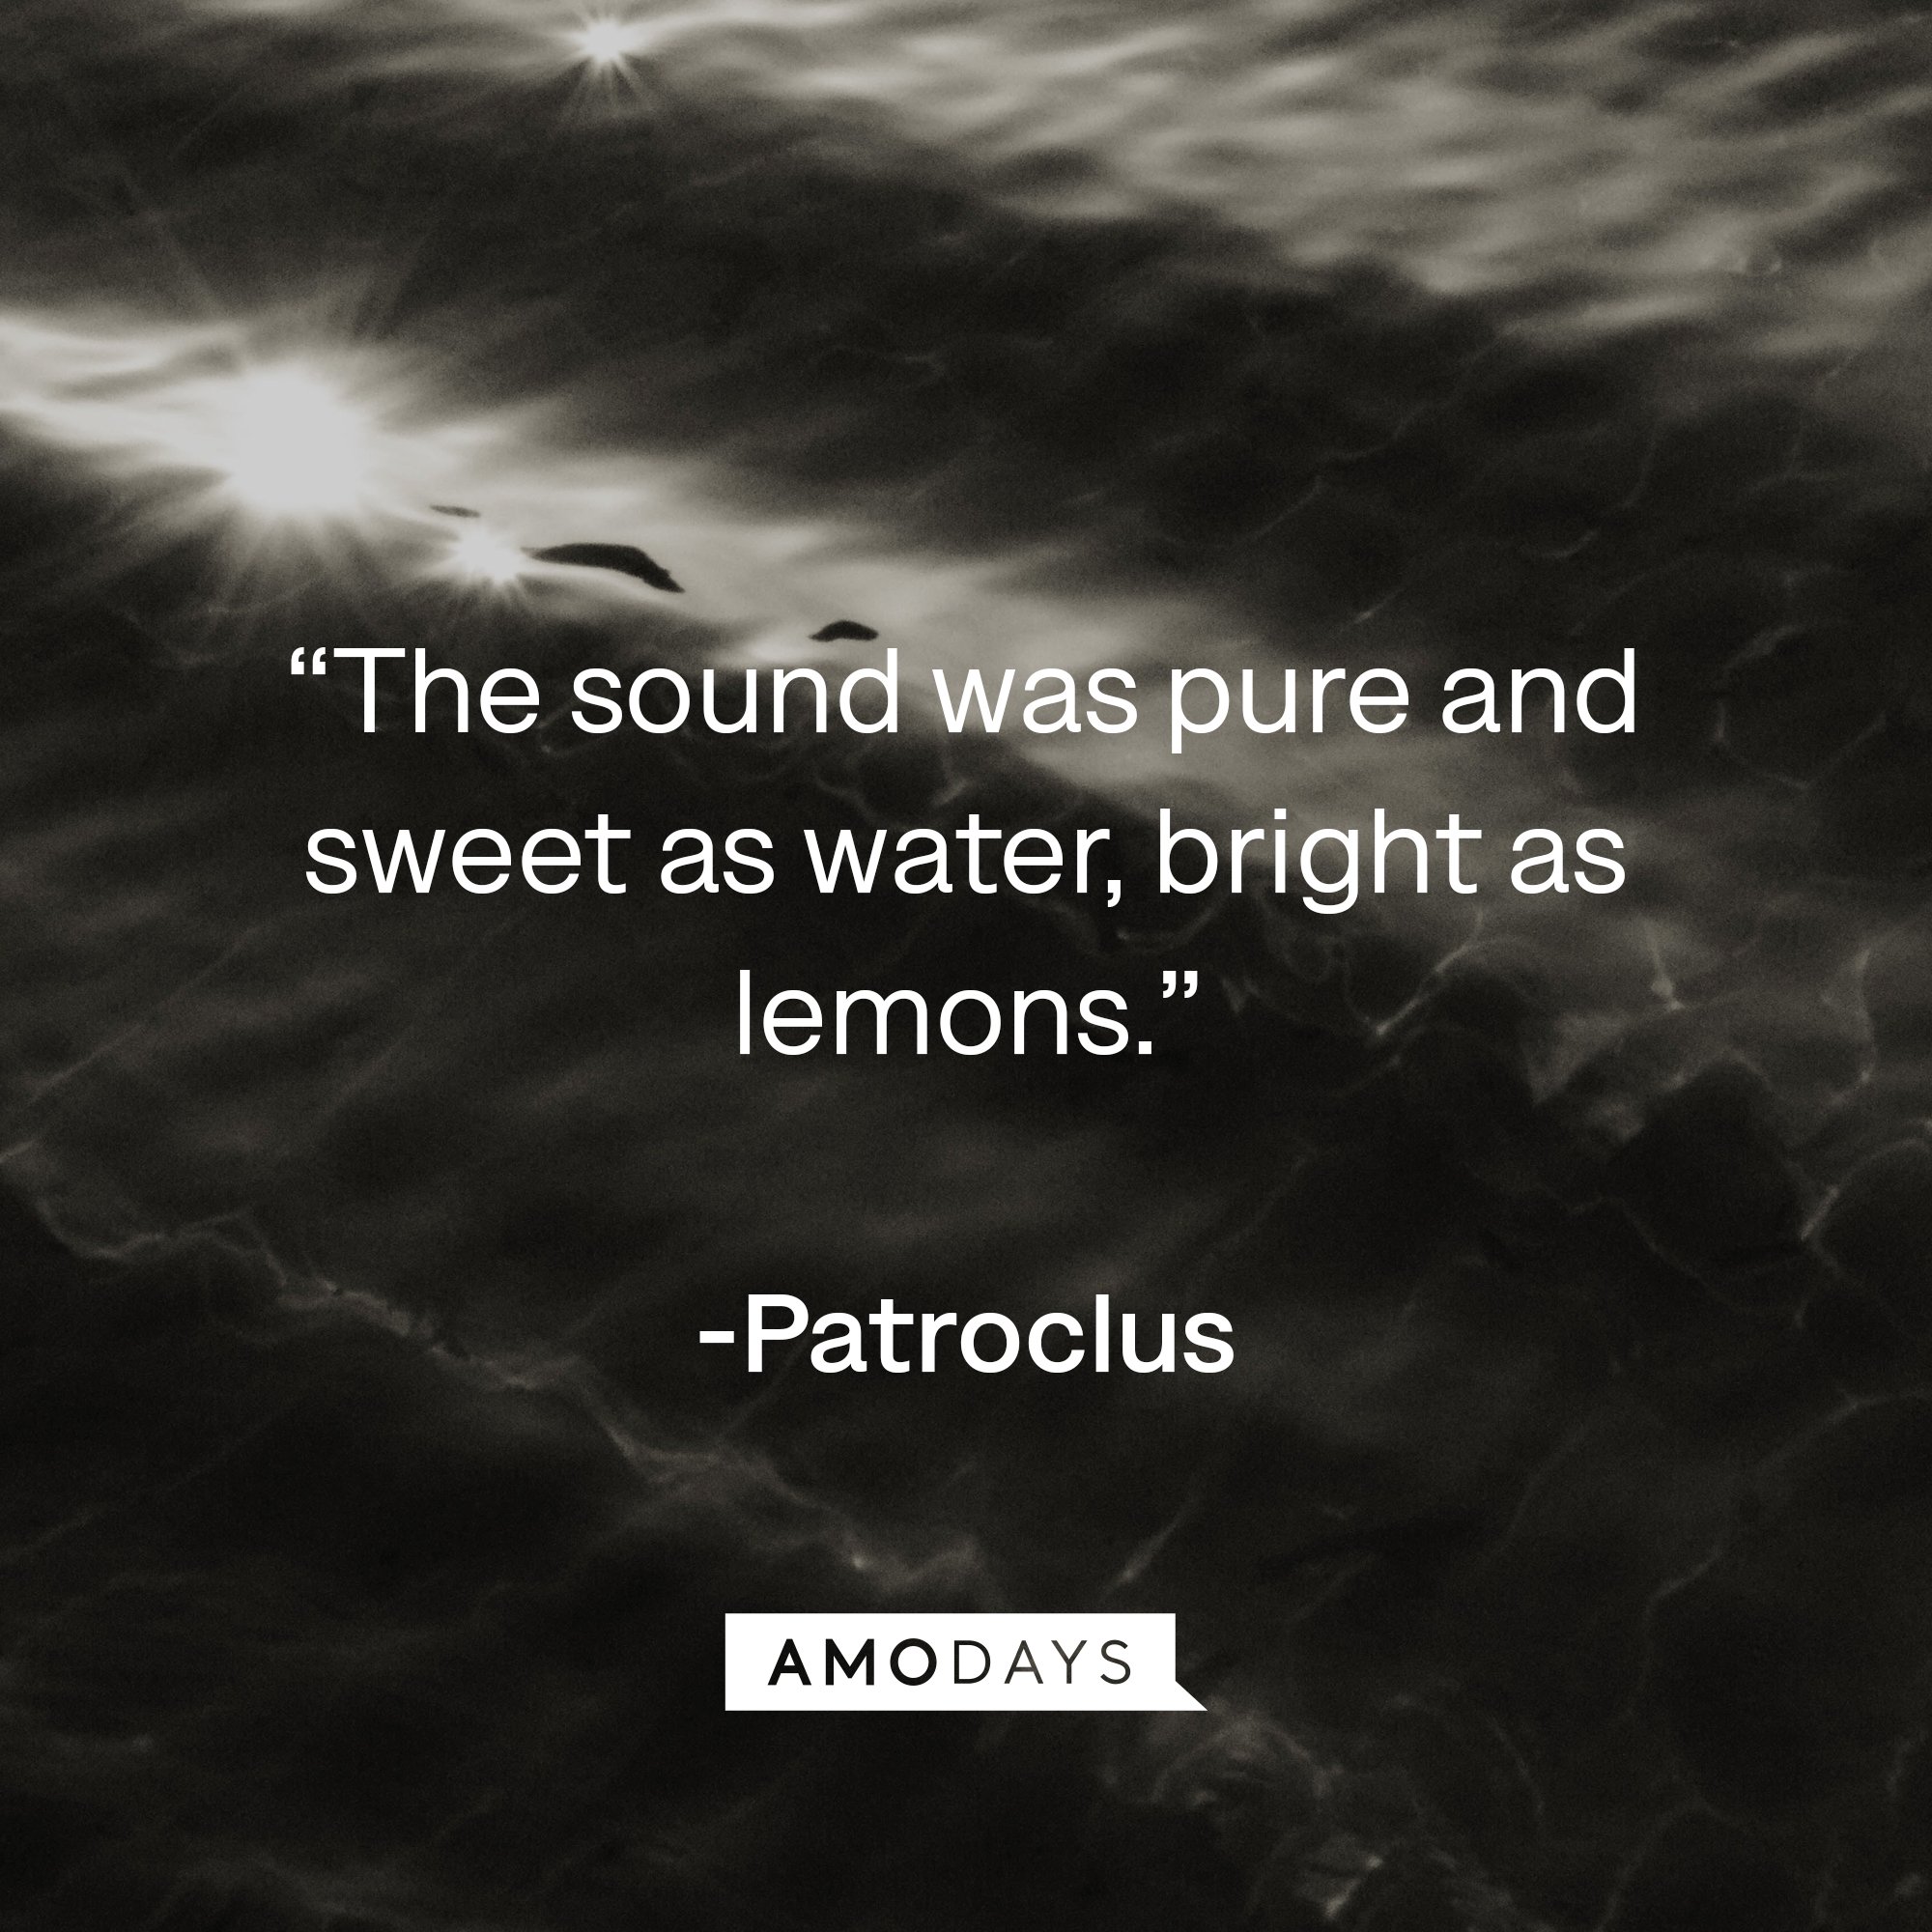 Patroclus's quote: “The sound was pure and sweet as water, bright as lemons.” | Image: AmoDays